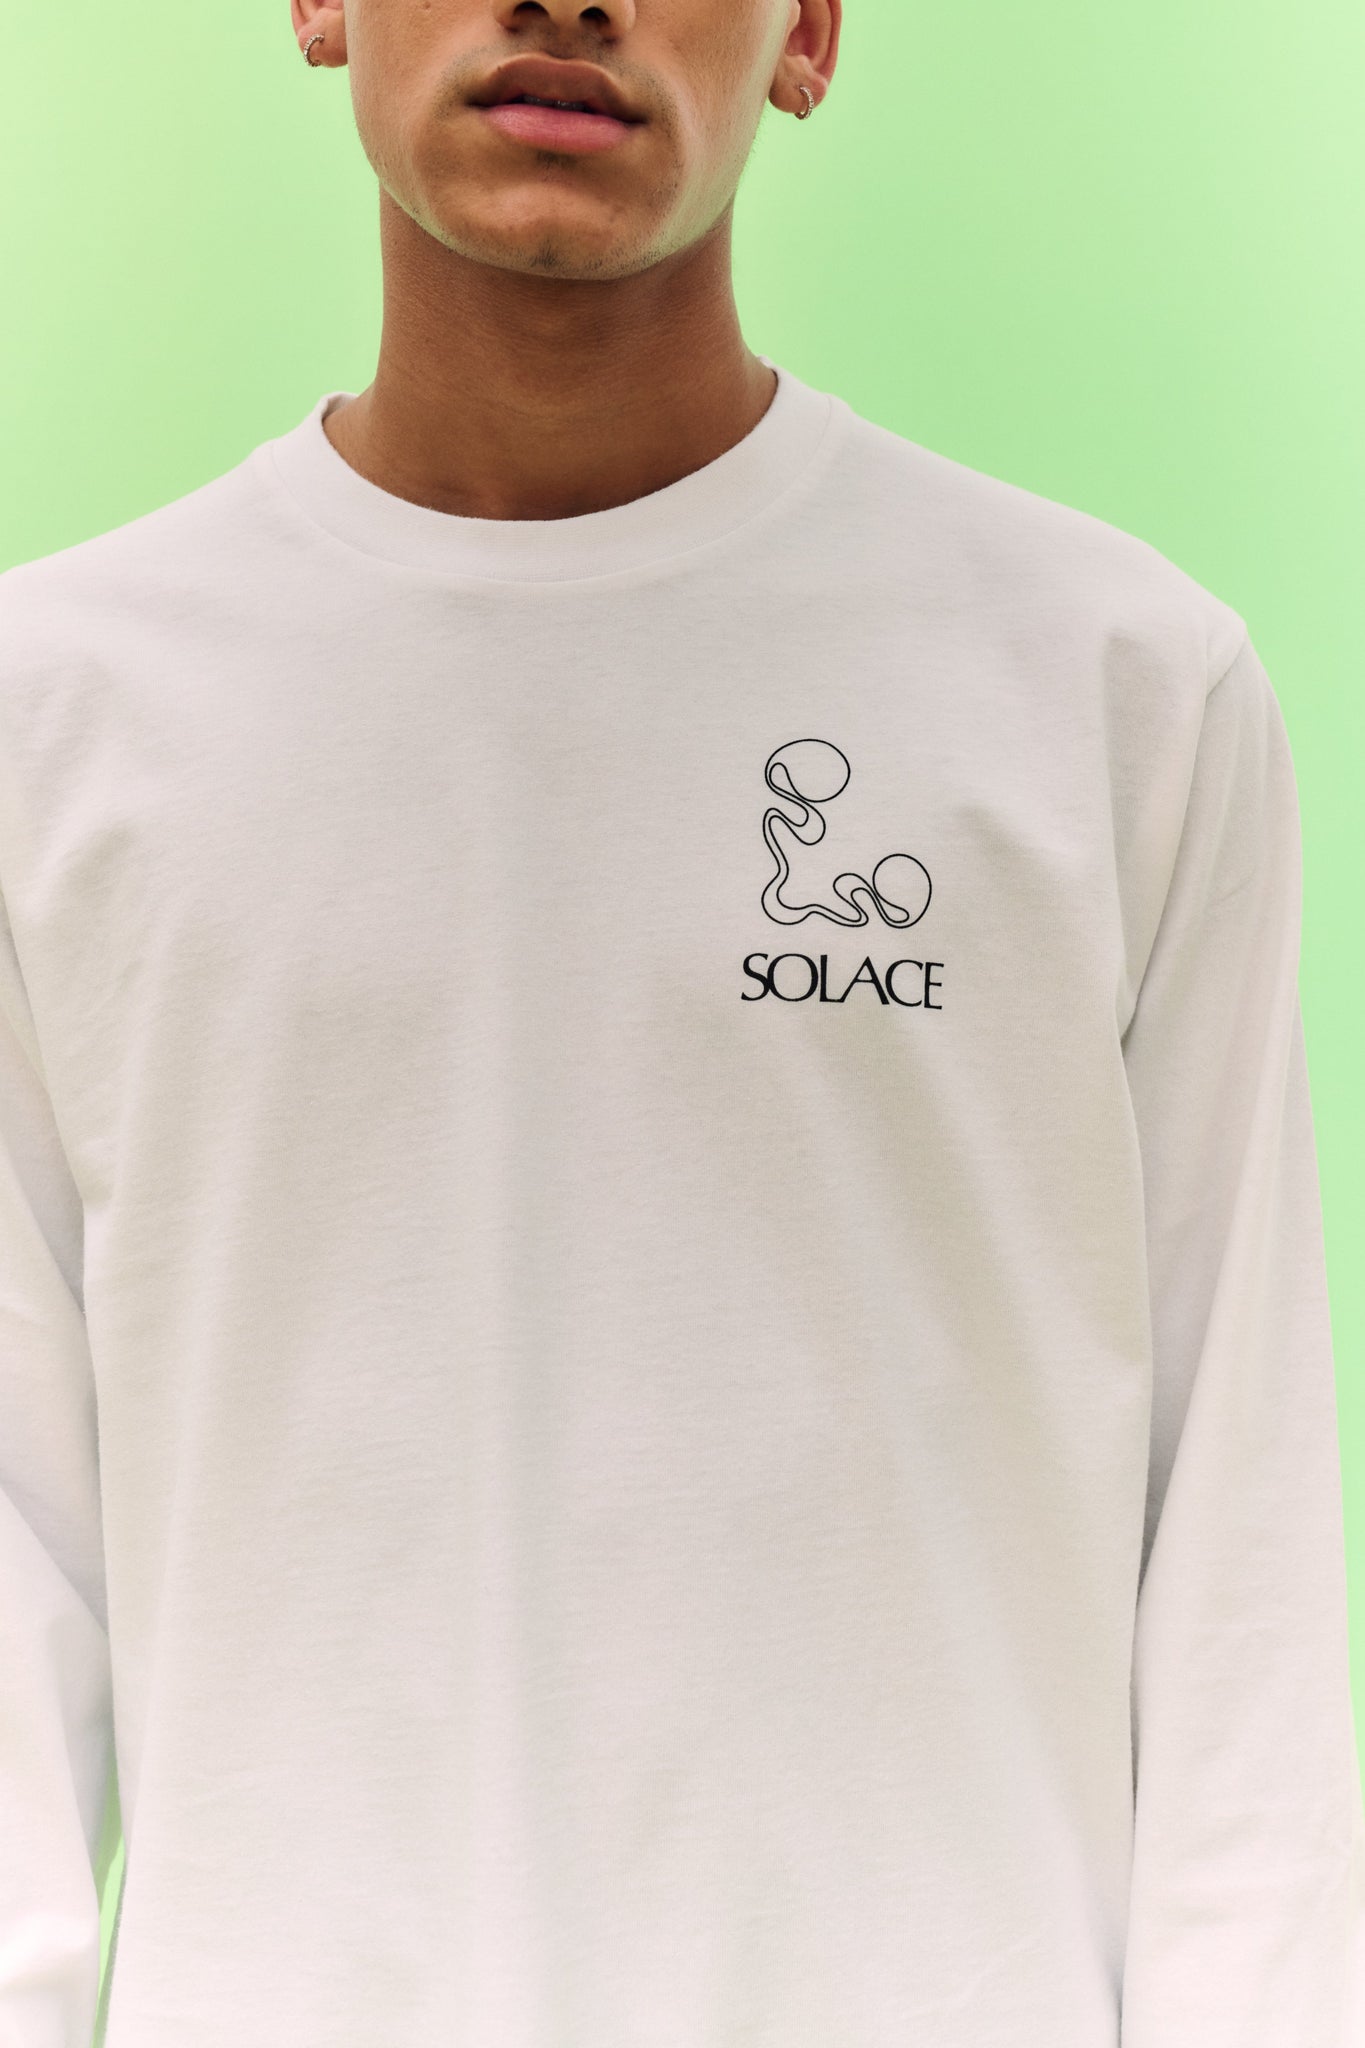 Solace London x James Carver White Tee